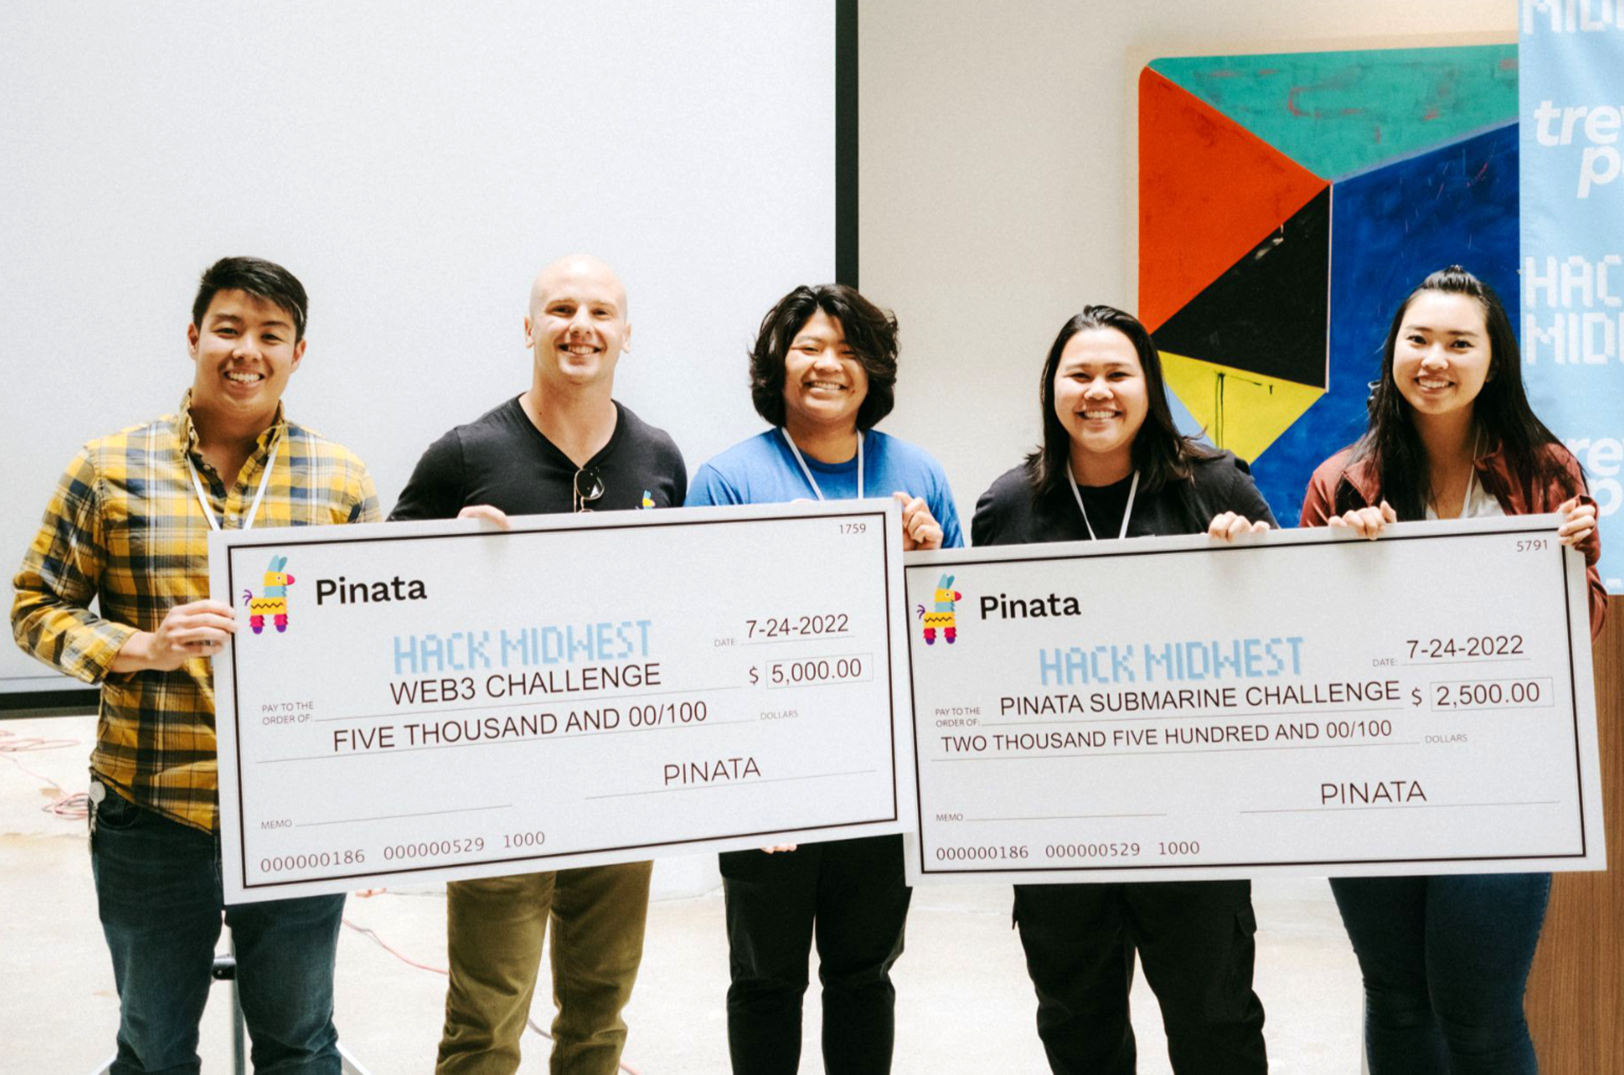 This one-day competition builds more than apps, organizers say; Hack Midwest aims to reveal what humans are capable of creating  